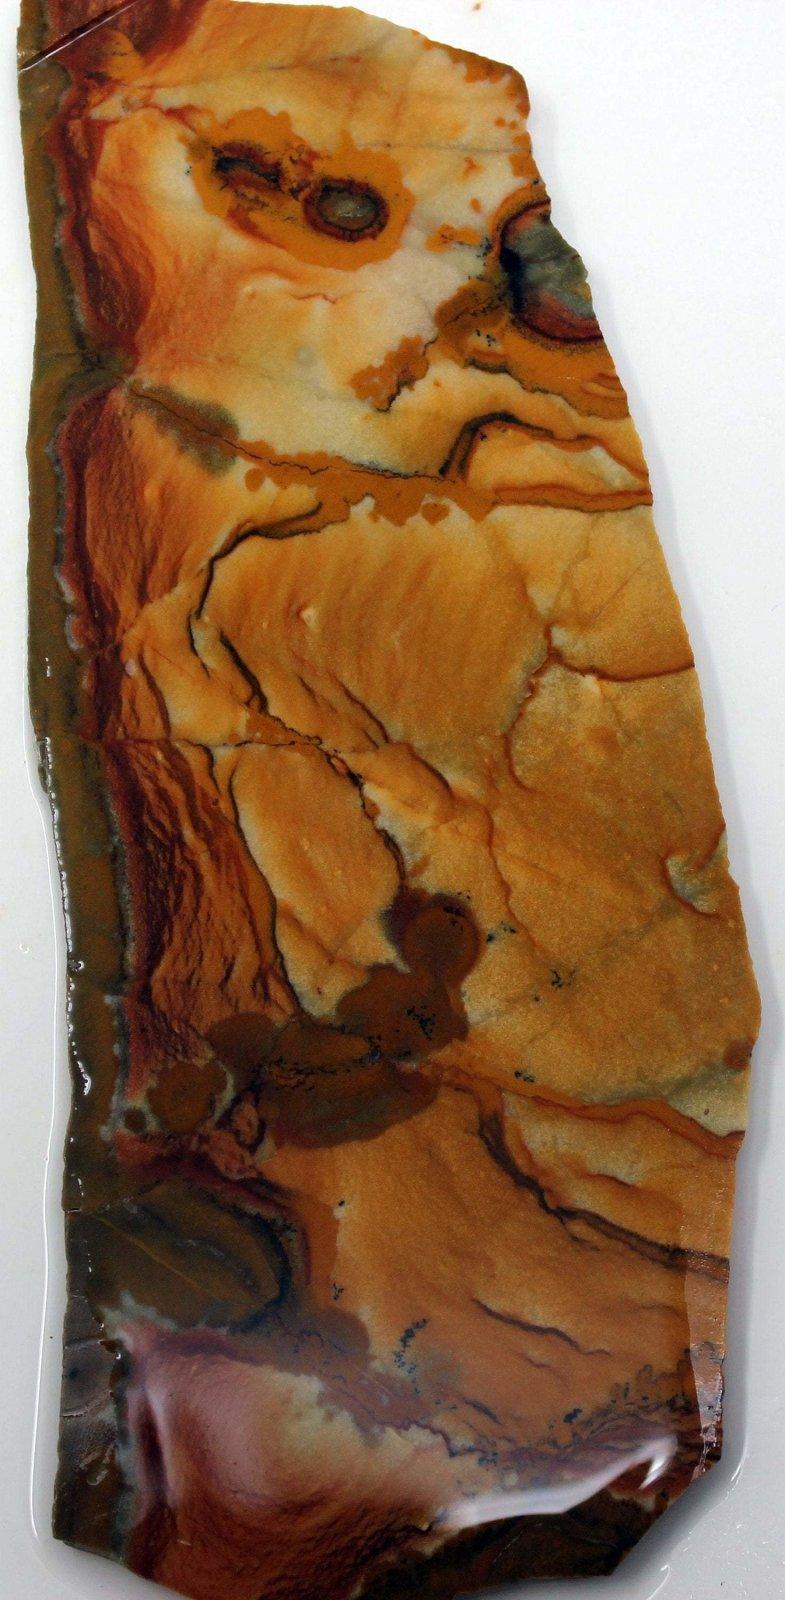 Old stock rocky butte picture jasper slab! lapidary stone slab! - LapidaryCentral